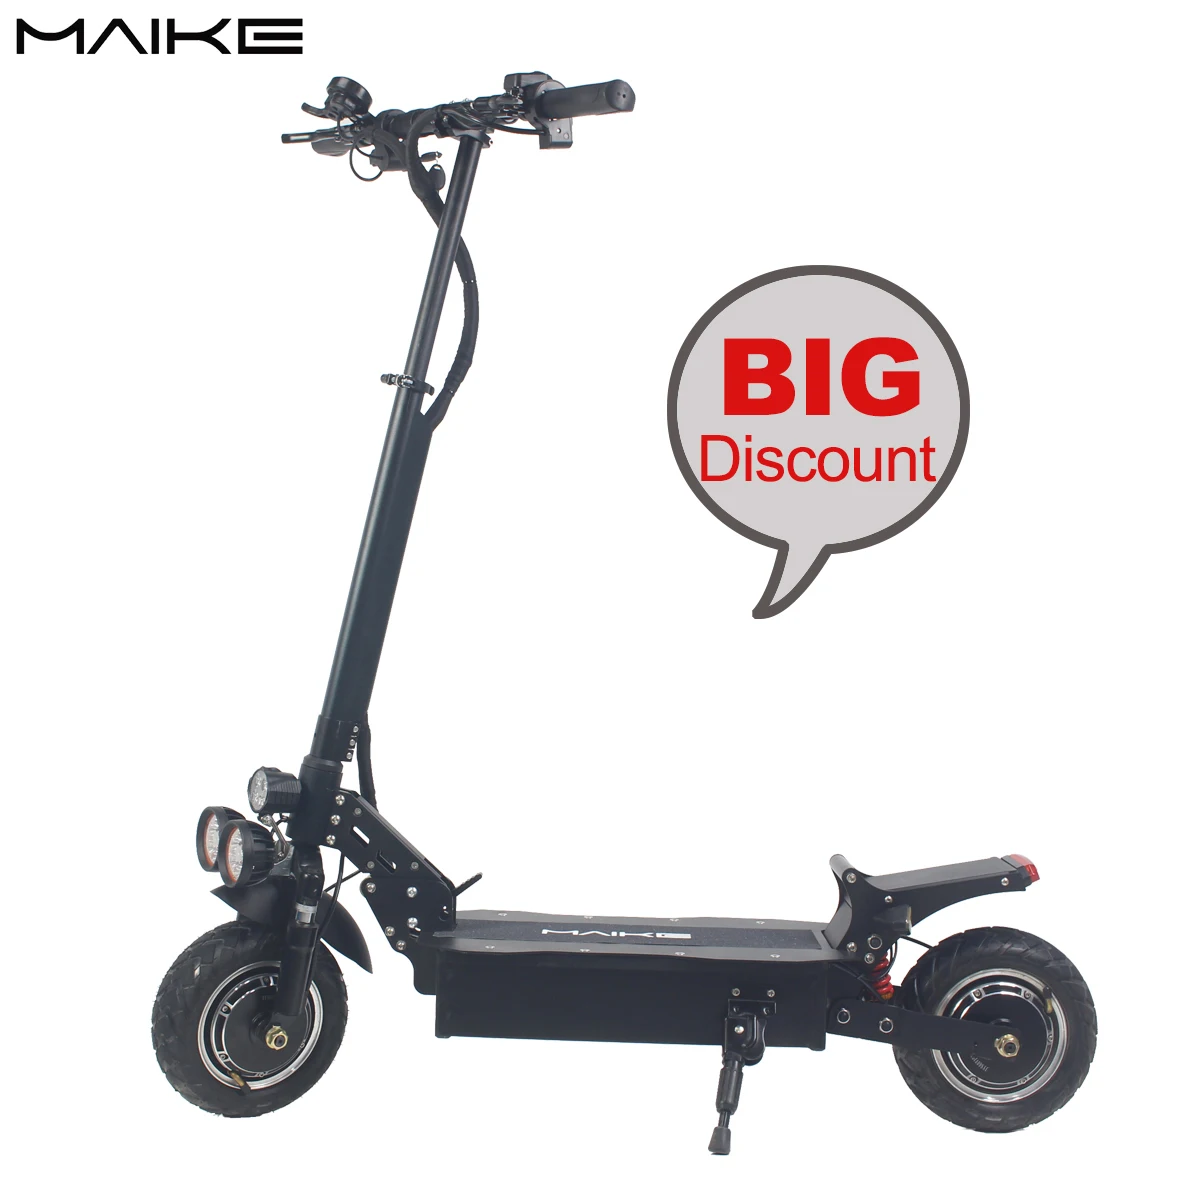 High Quality Wholesale maike mk6 10 inch foldable e scooter 1000w 2000w off road electric kick scooters for adults